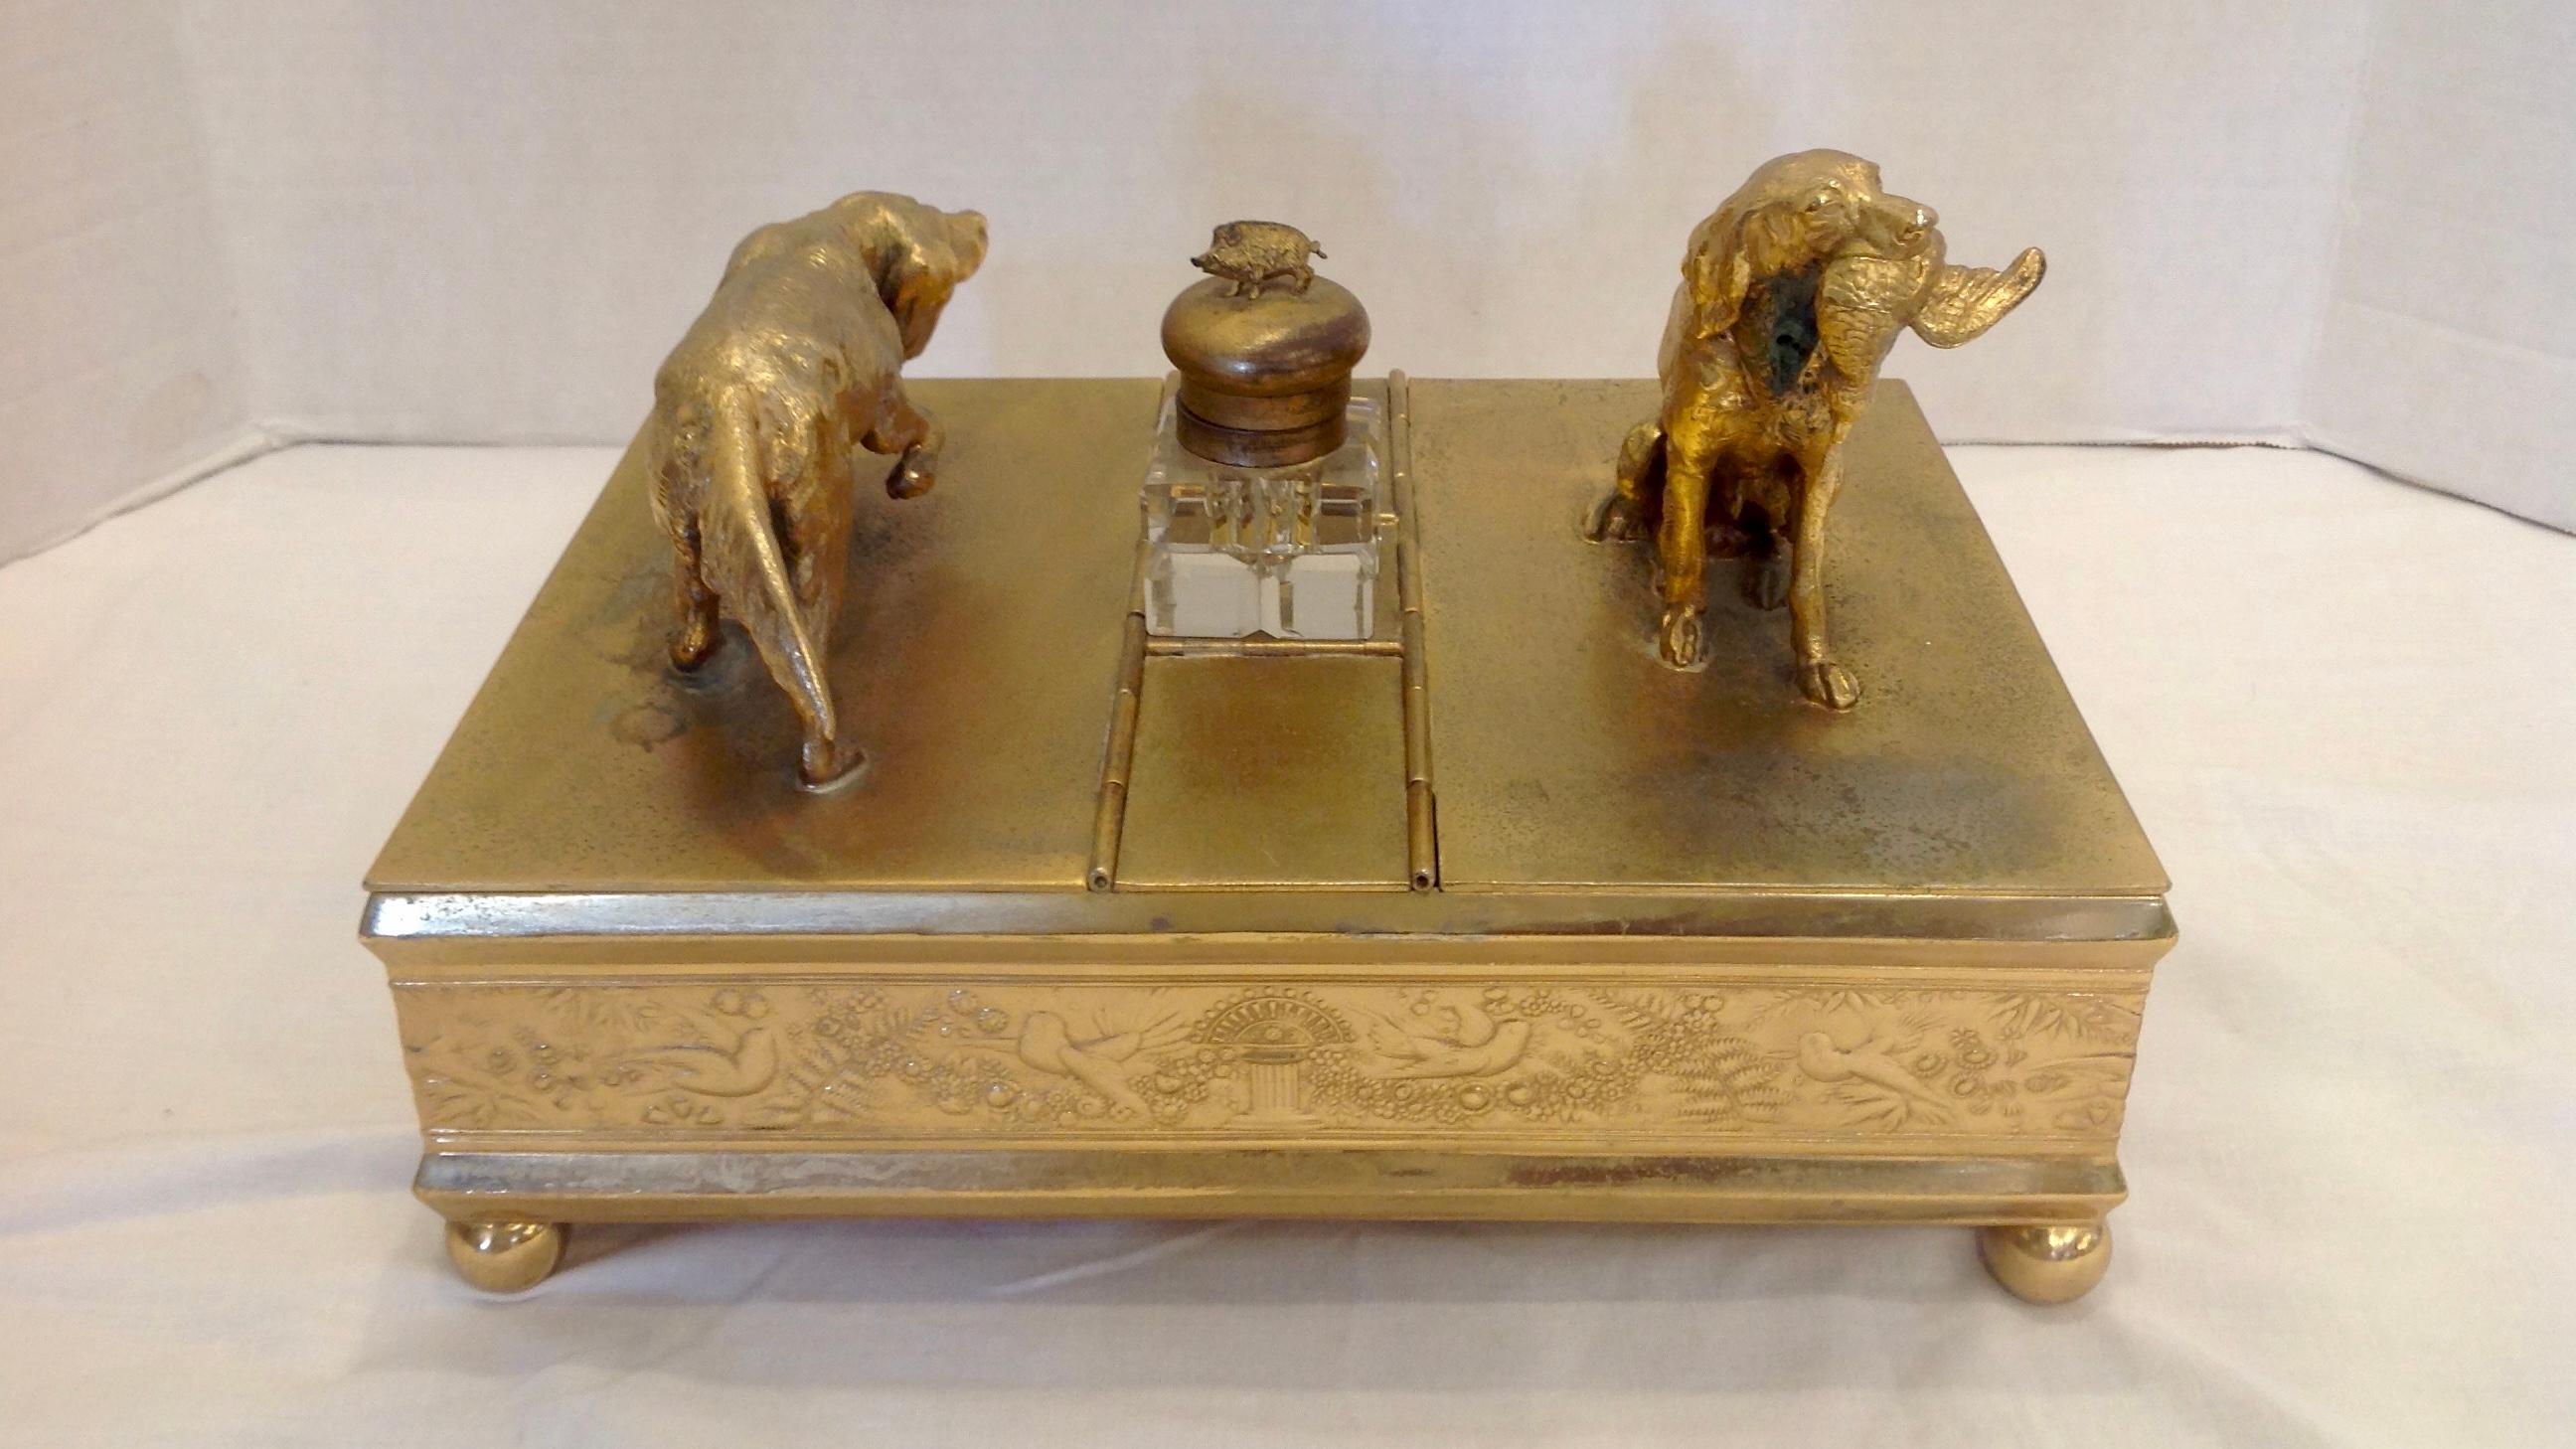 Gilt metal appointed with hunting dogs, one holding waterfowl in his mouth,
the other prowling. The inkwell lid is adorned with a boar.
Maid by Meridan, Connecticut in the 1890s.